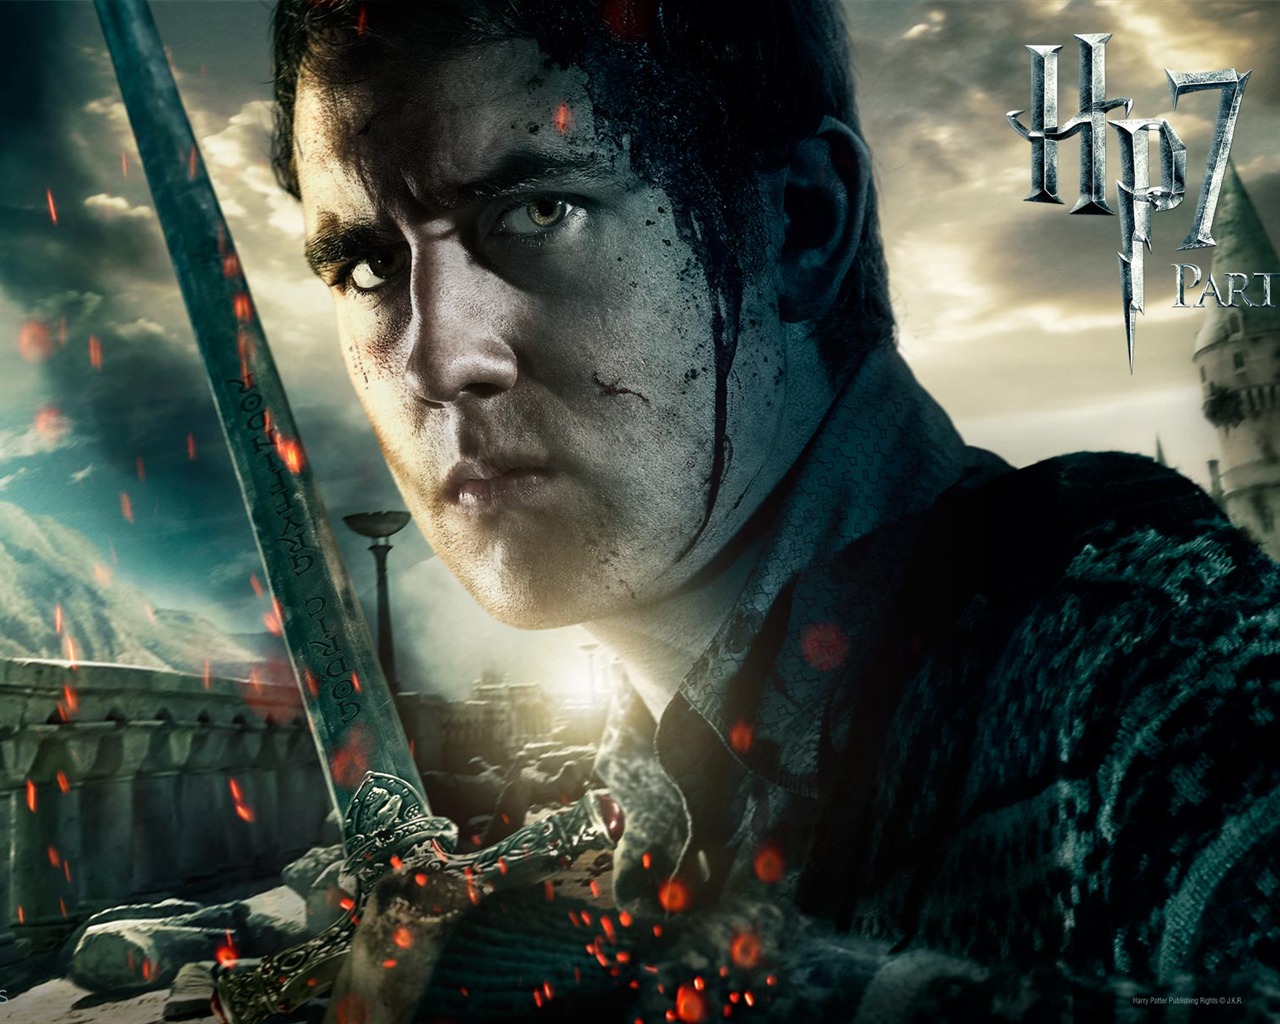 2011 Harry Potter and the Deathly Hallows HD wallpapers #13 - 1280x1024